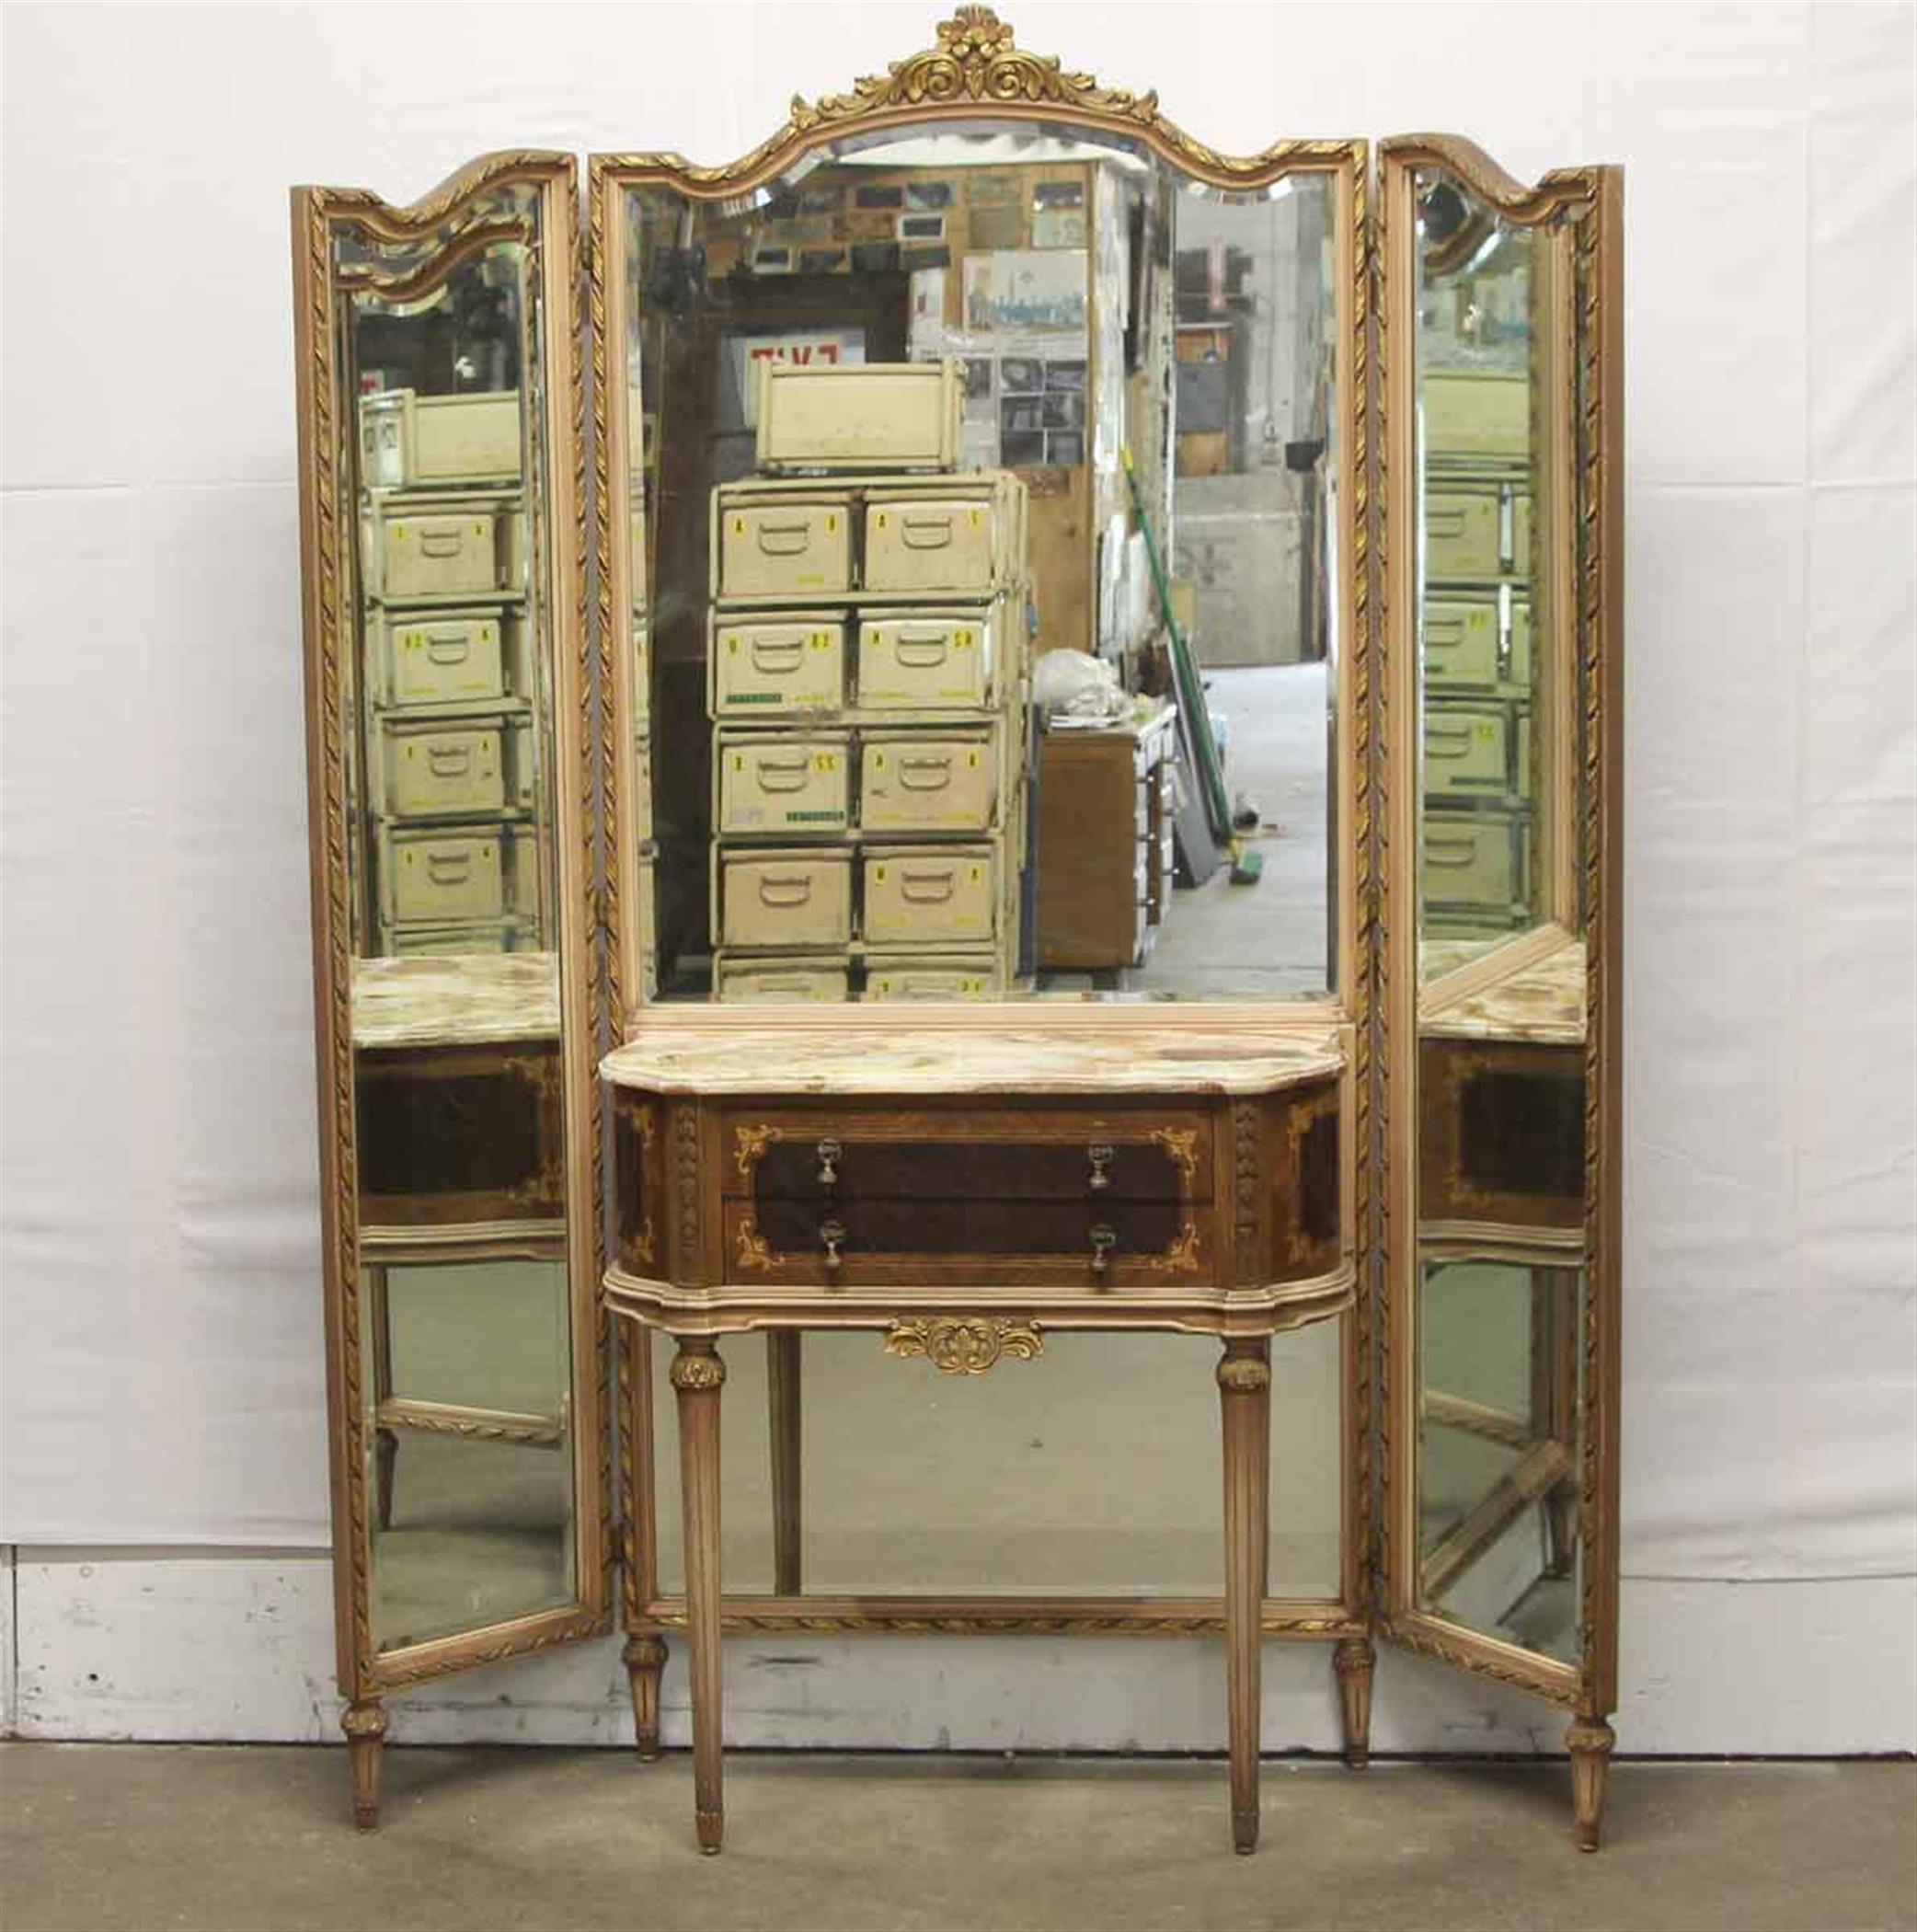 1940s Federal style carved wood entryway table with two drawers and an attached tri-fold mirror. It features a marble top table with brown, gray, yellow and white veining. This can be seen at our 333 West 52nd St location in the Theater District